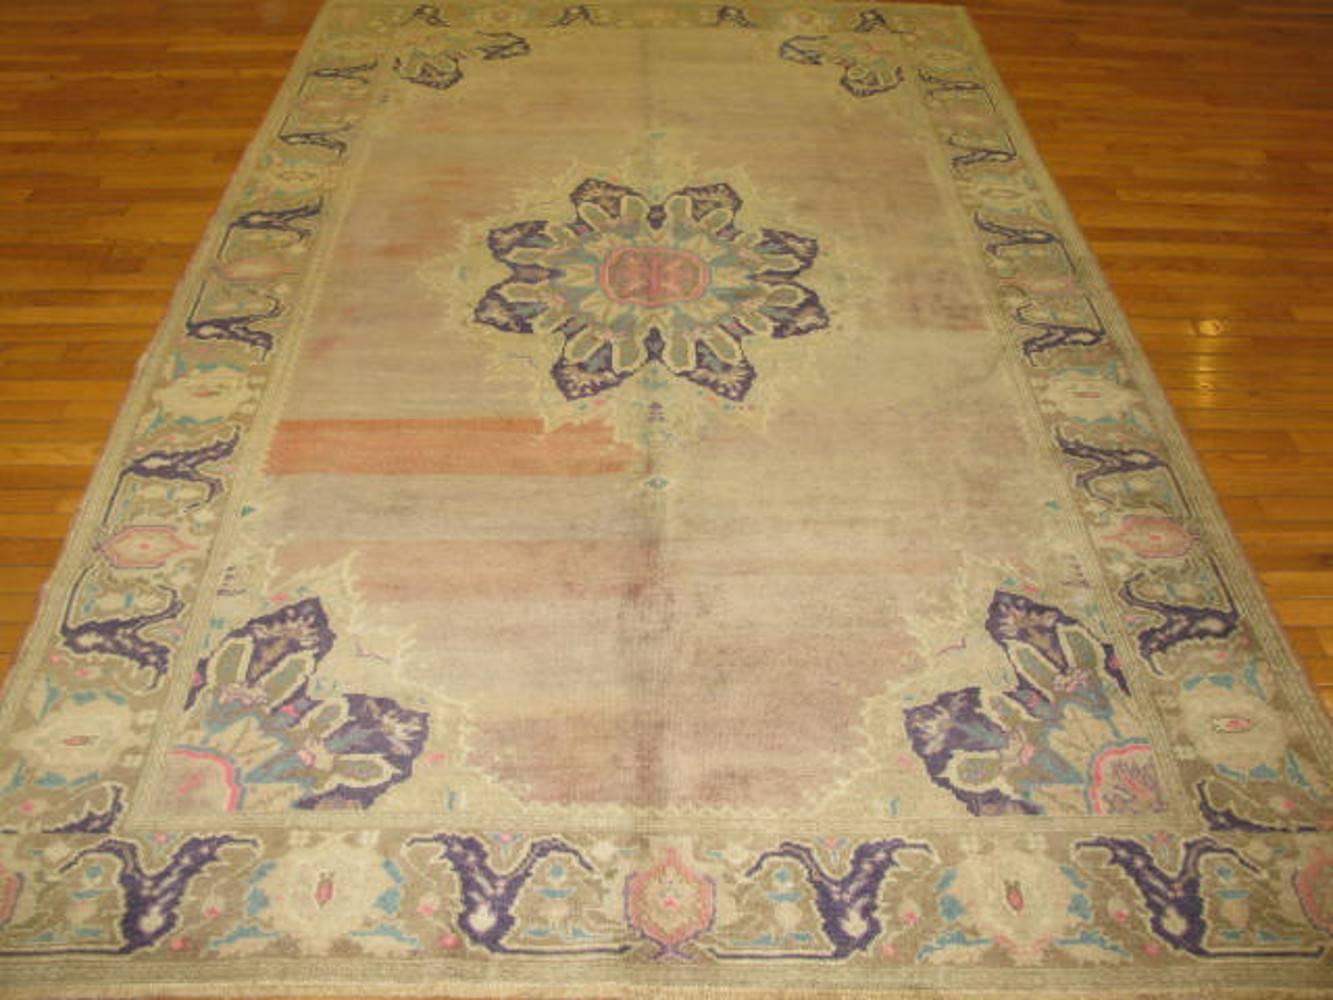 This is a hand-knotted rug from in Turkey. This beautiful rug is made with wool and natural dyes antique washed for softer colors. It measures 5' 9'' x 9' 7'' and is in great condition.